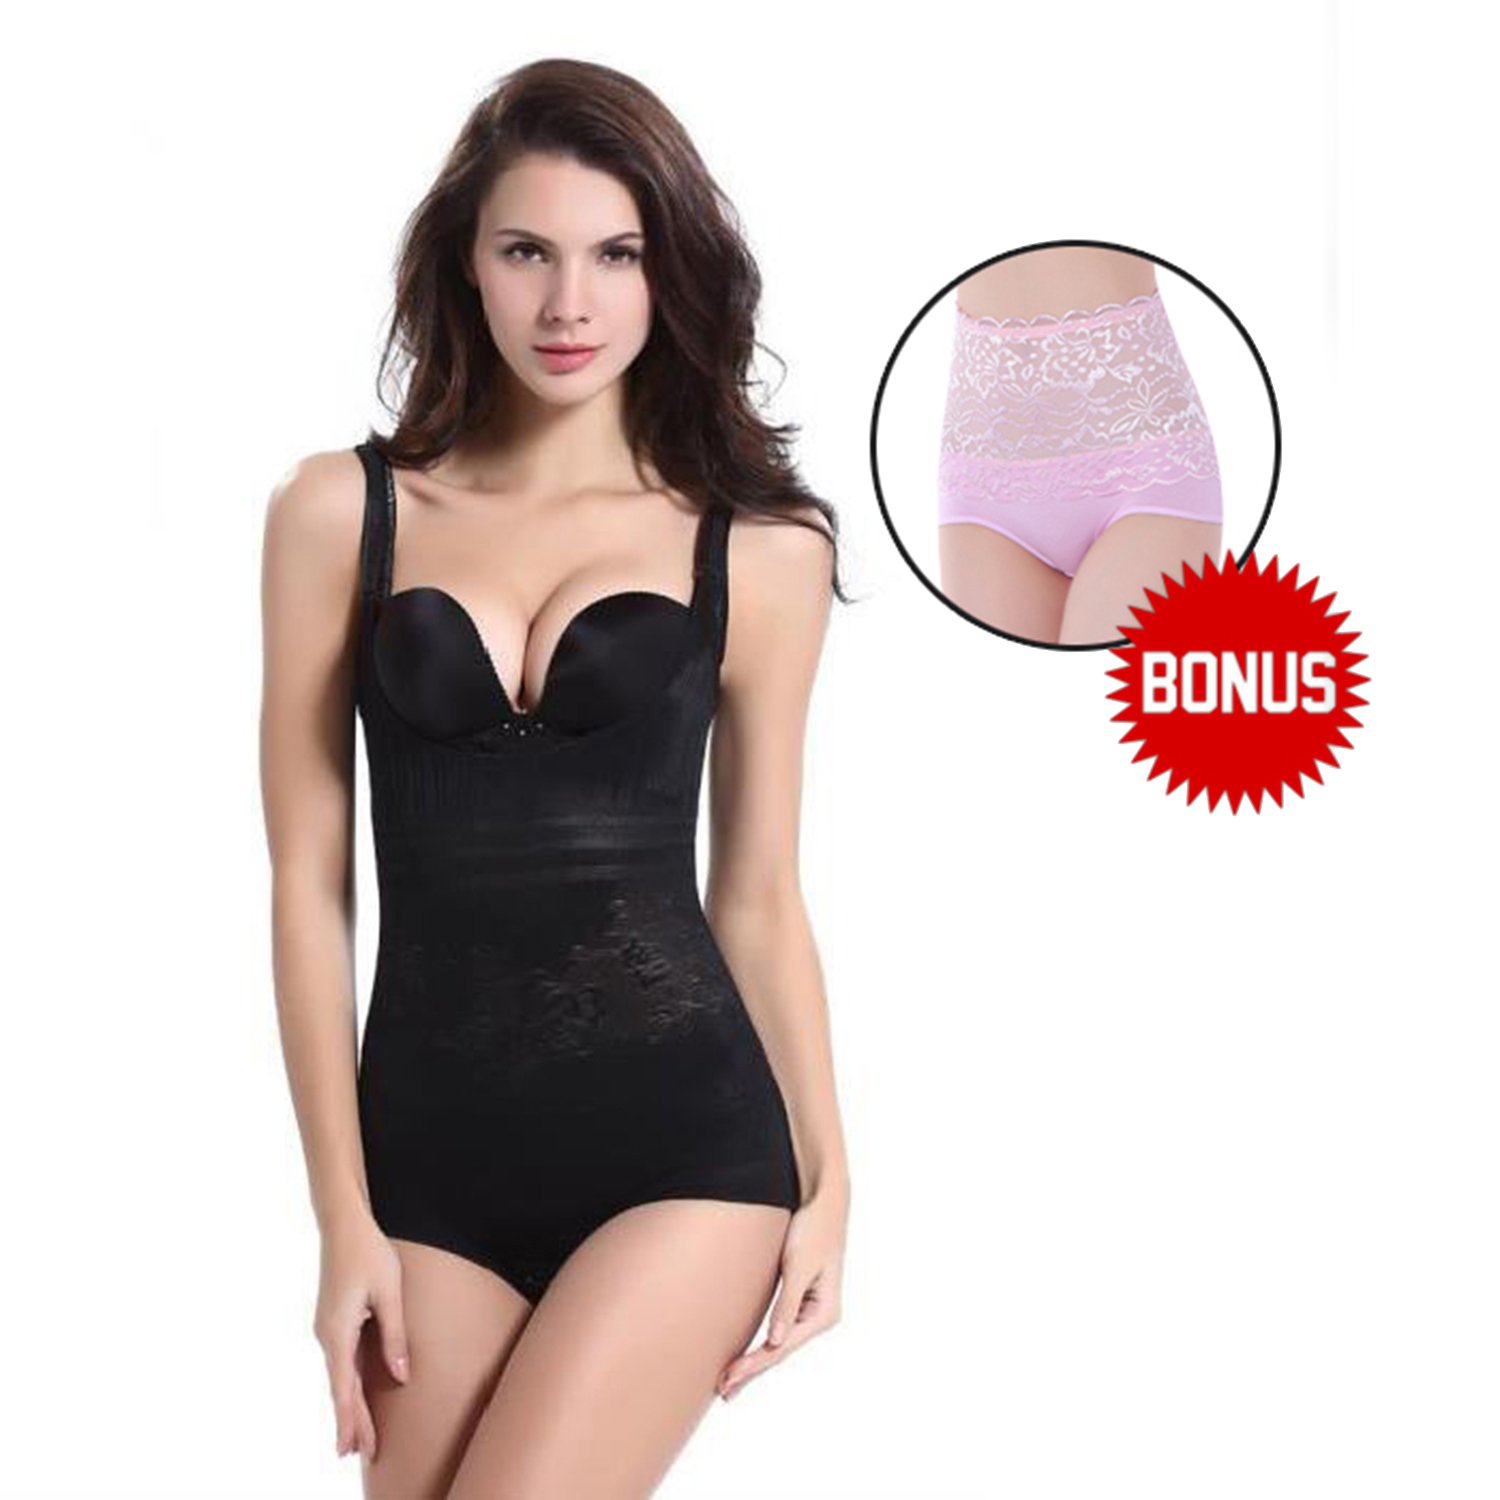 Women's Shapewear/Shaper BodySuit Body Briefer + Sexy High Waist Tummy  Control Panty for a Smooth Slimming Appearance.